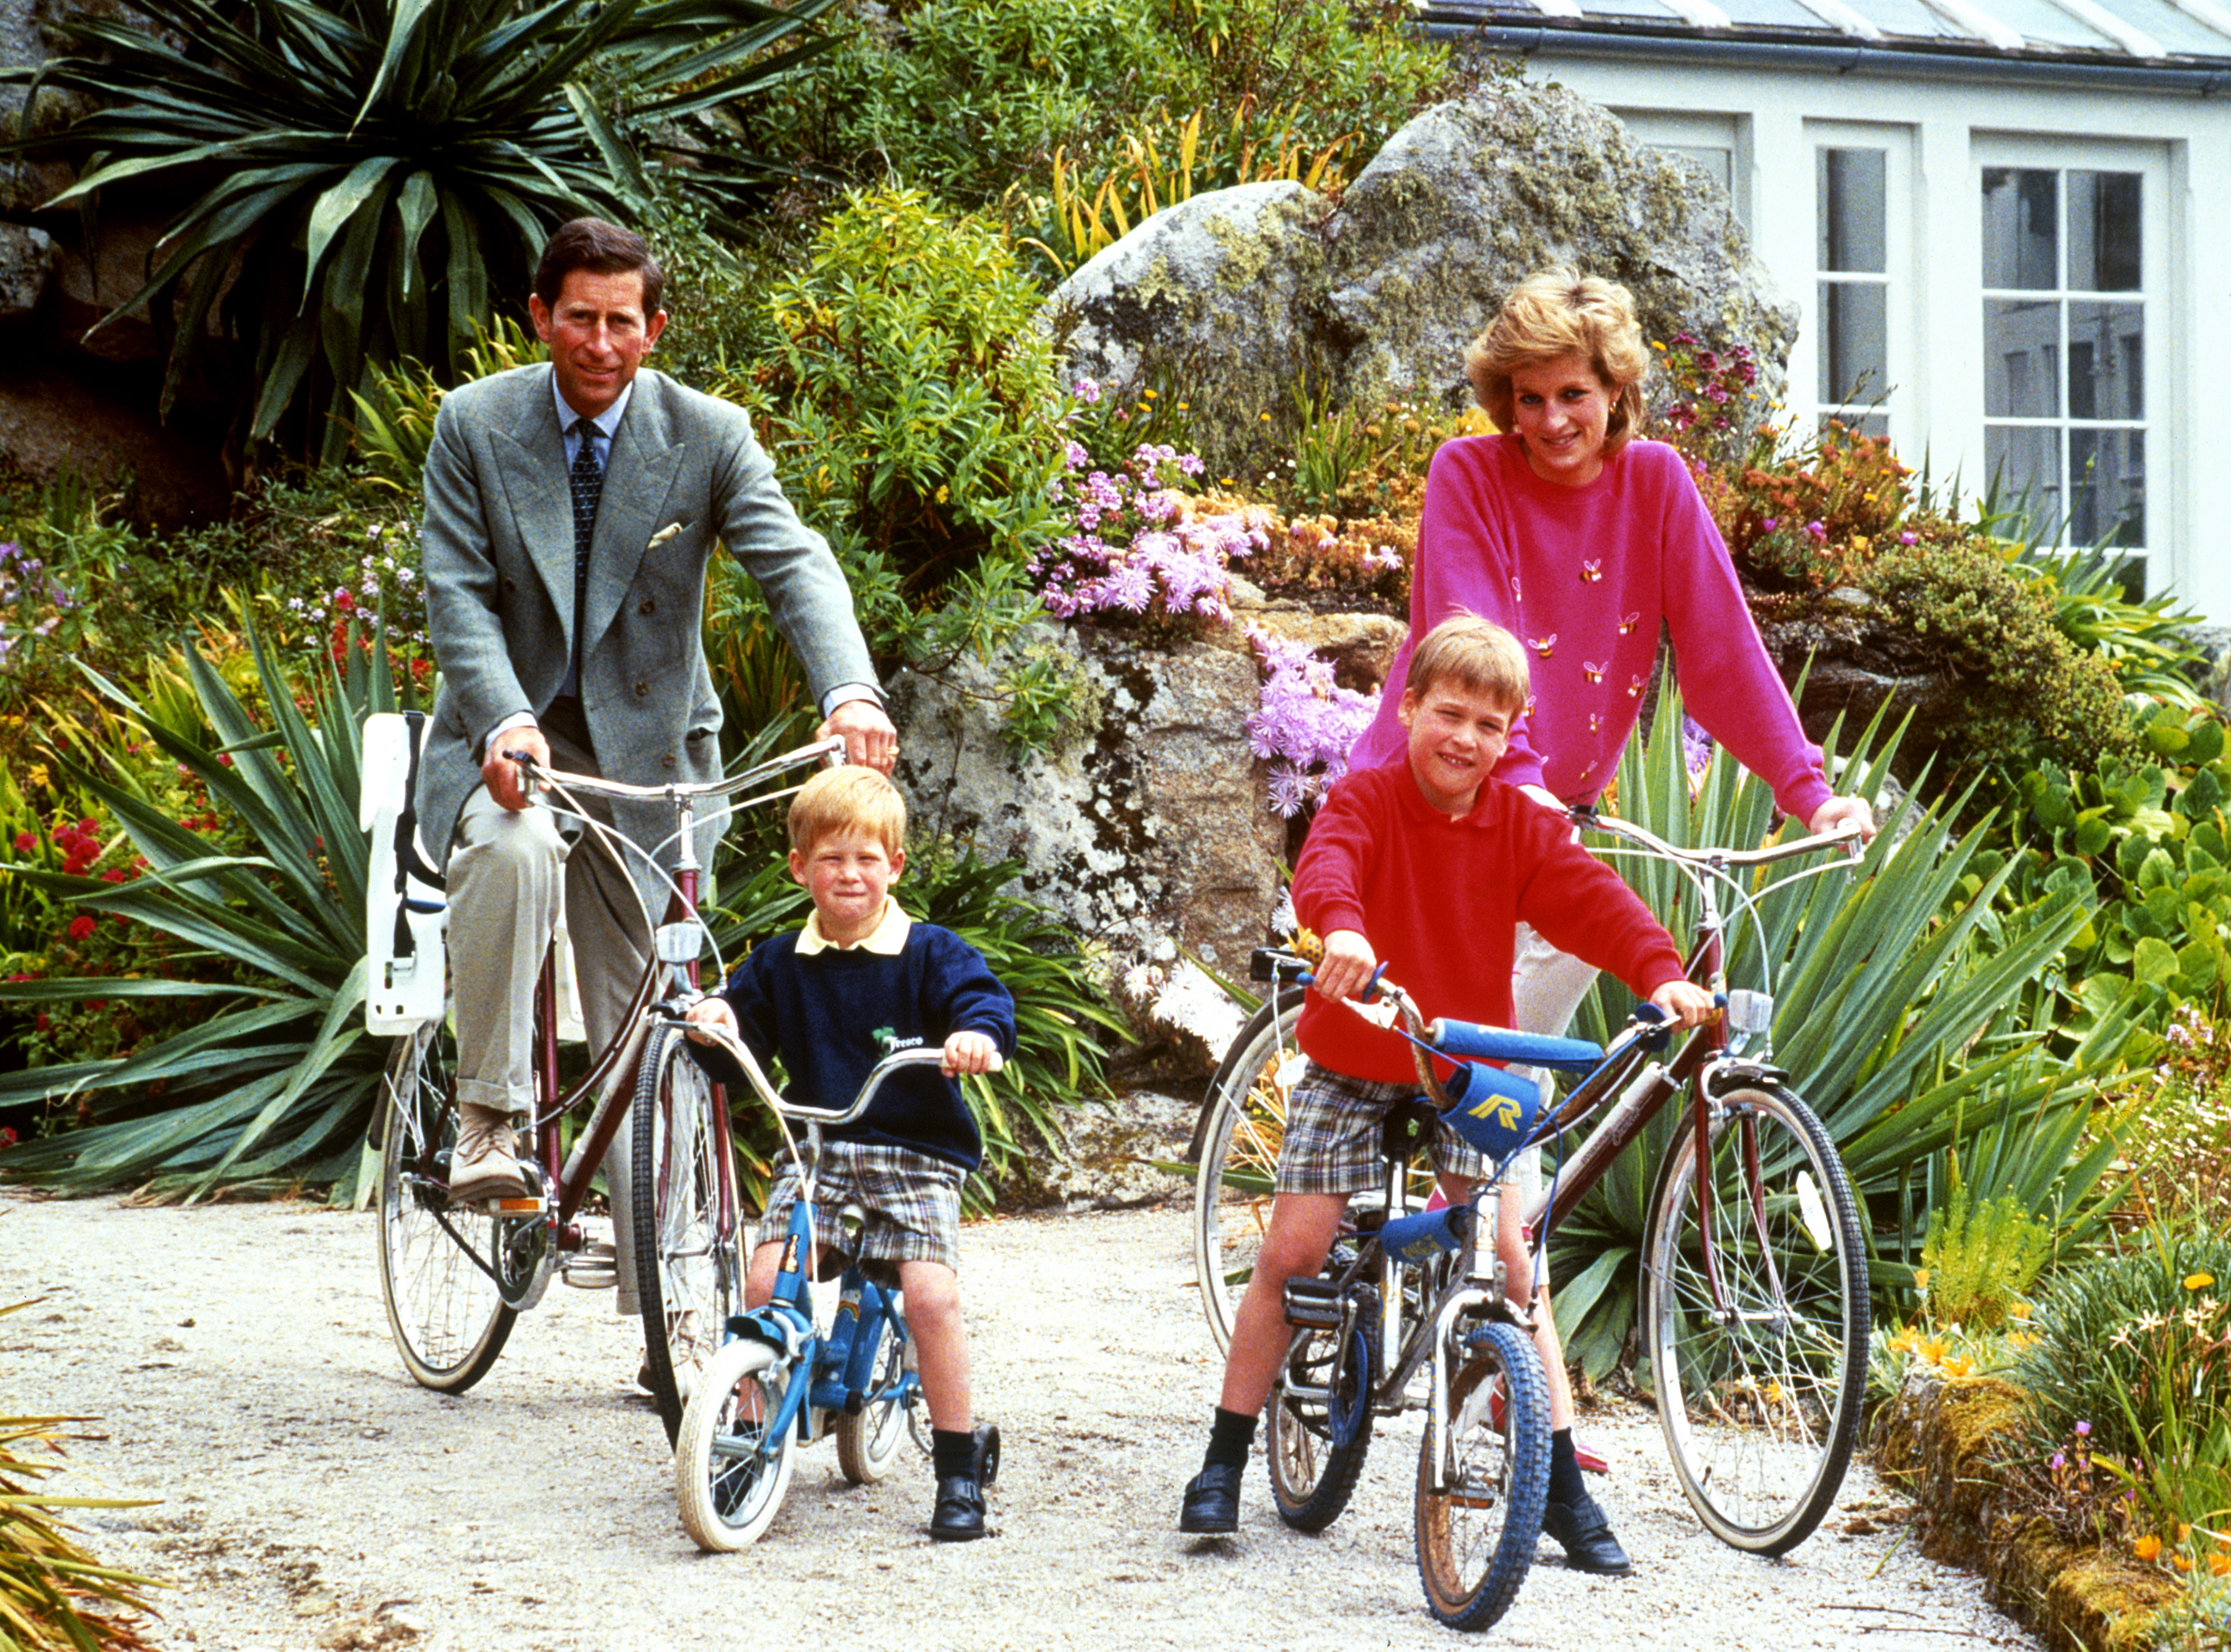 The Waleses prepare for a cycling trip in Tresco during their holiday in the Scilly Isles in 1989